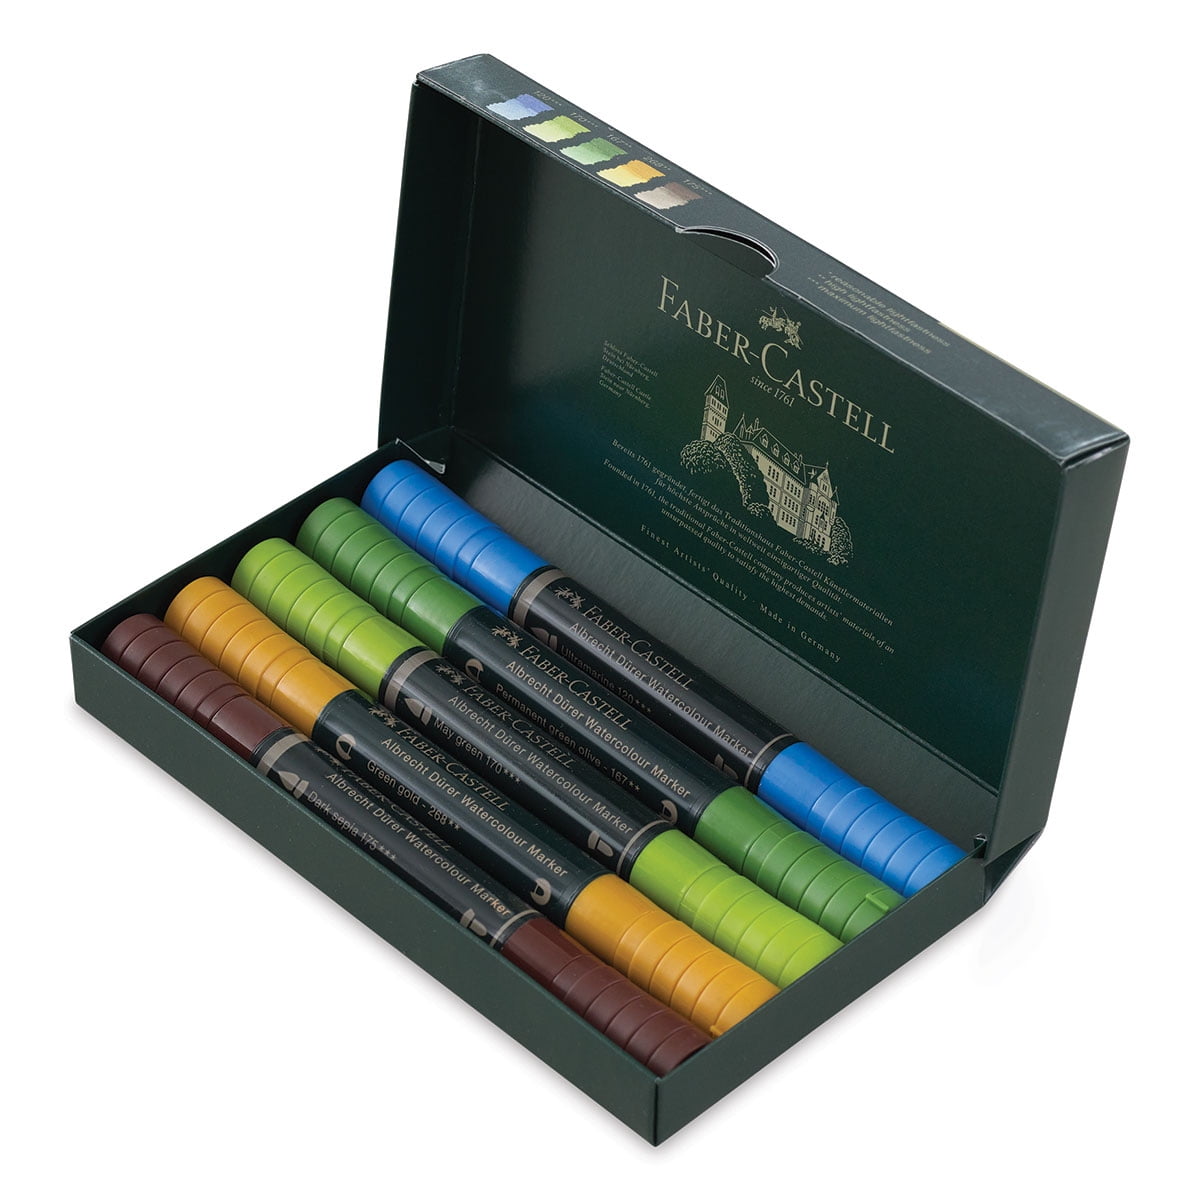 Savings Star faber castell markers